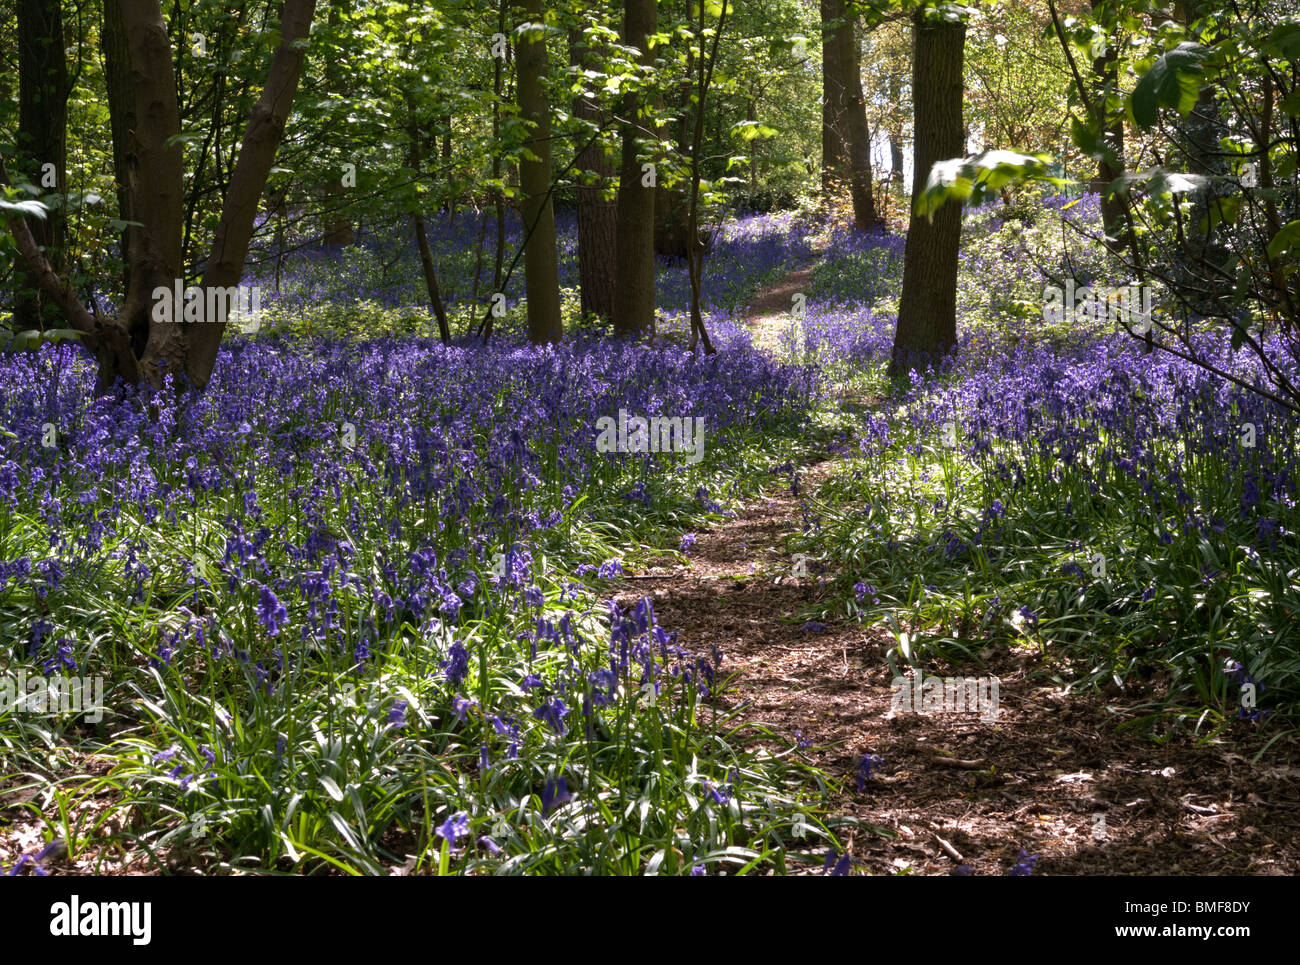 A pathway through a bluebell woodland. Stock Photo